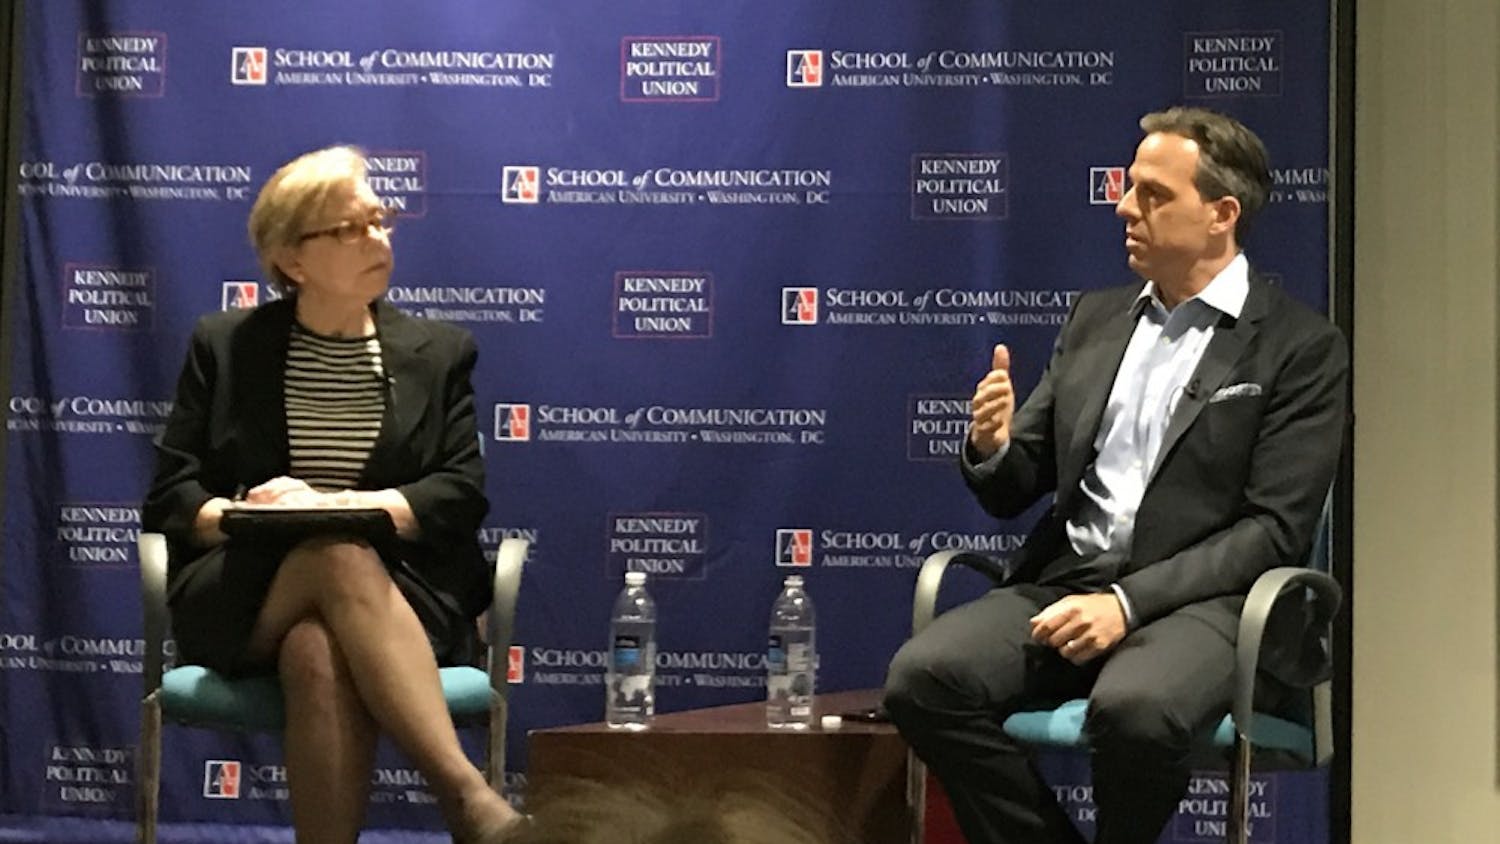 Professor Jane Hall interviews CNN anchor Jake Tapper at an event hosted by the School of Communication and Kennedy Political Union.